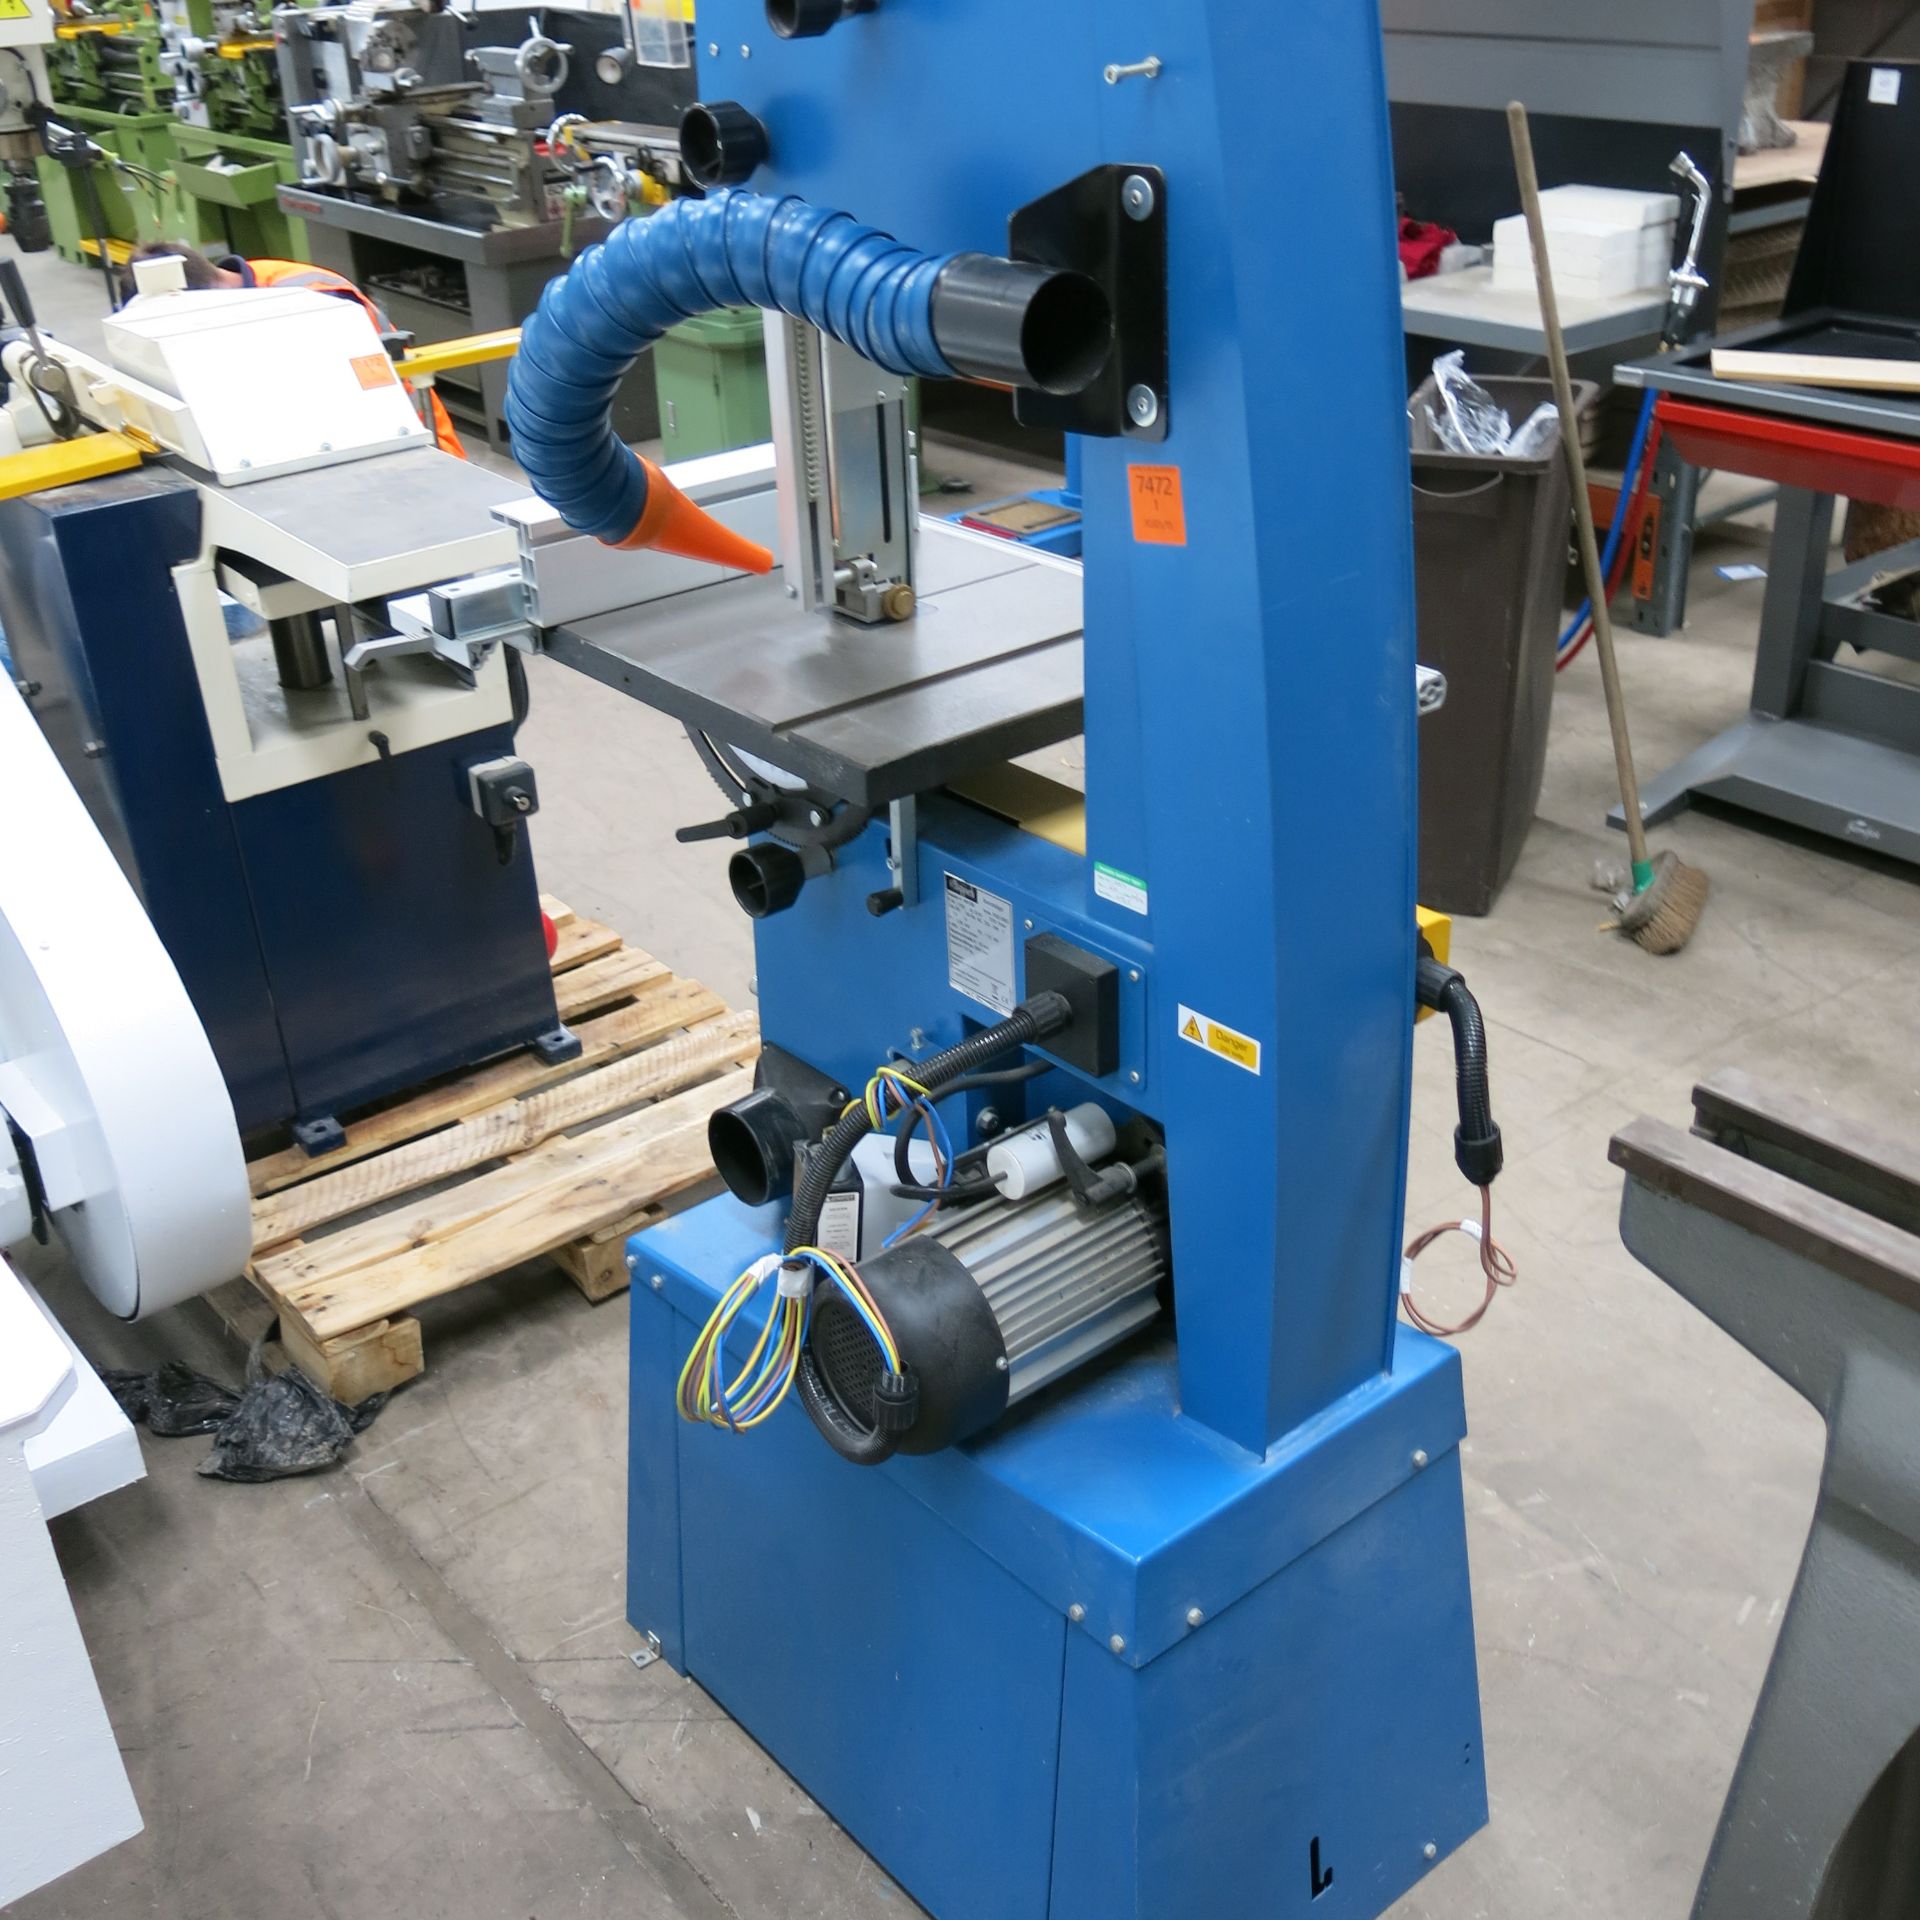 * A Scheppach Basato 4 Bandsaw MIT UG 240V. Please note, there is a £5 plus vat handling fee on this - Image 3 of 5